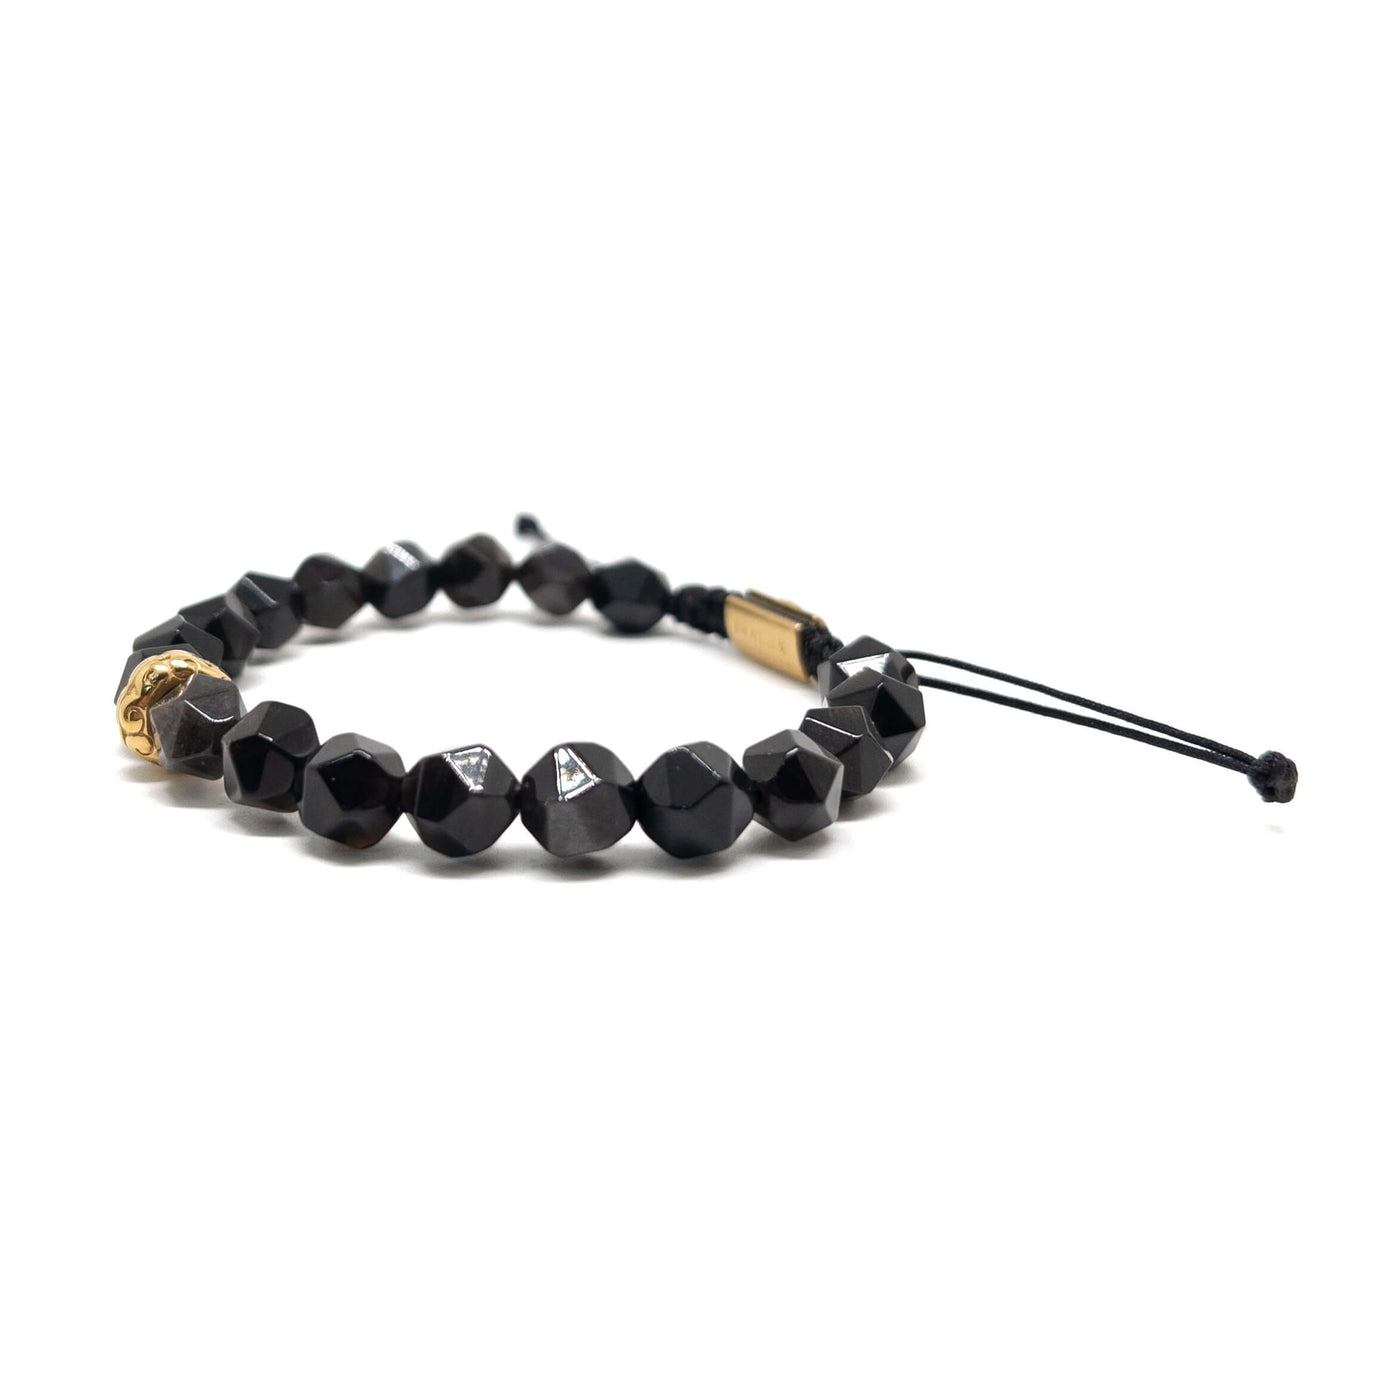 The Black agate and Silver Obsidian Bracelet